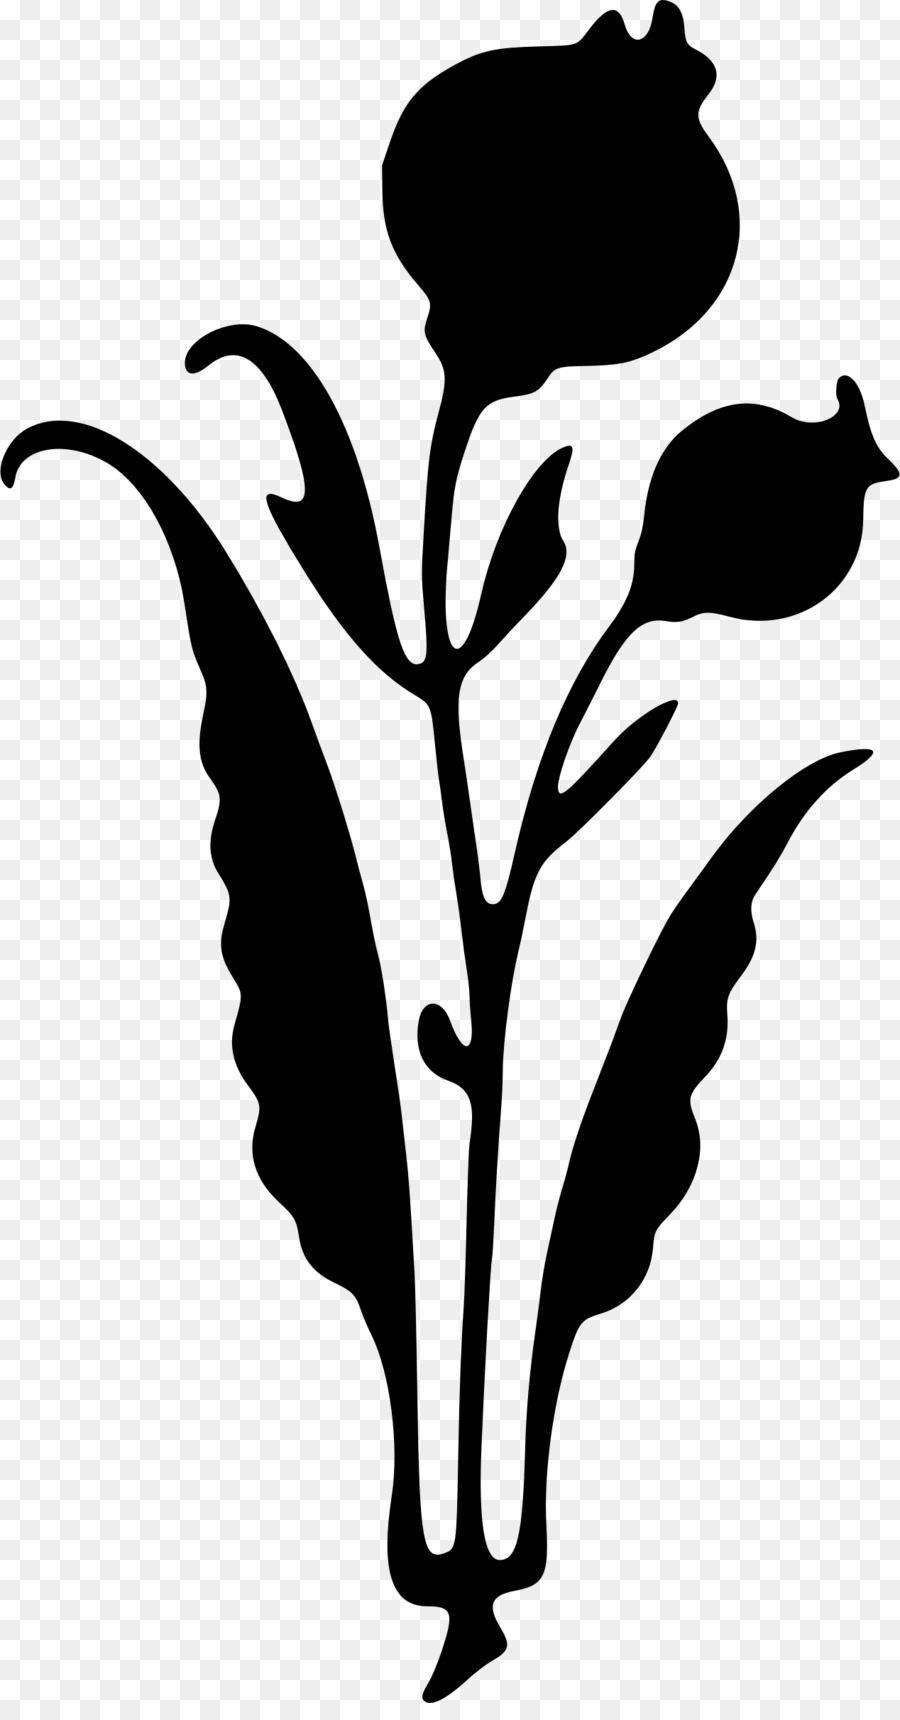 Analecta eboracensia Silhouette Flower Clip art - Silhouette png download - 1268*2400 - Free Transparent Silhouette png Download.